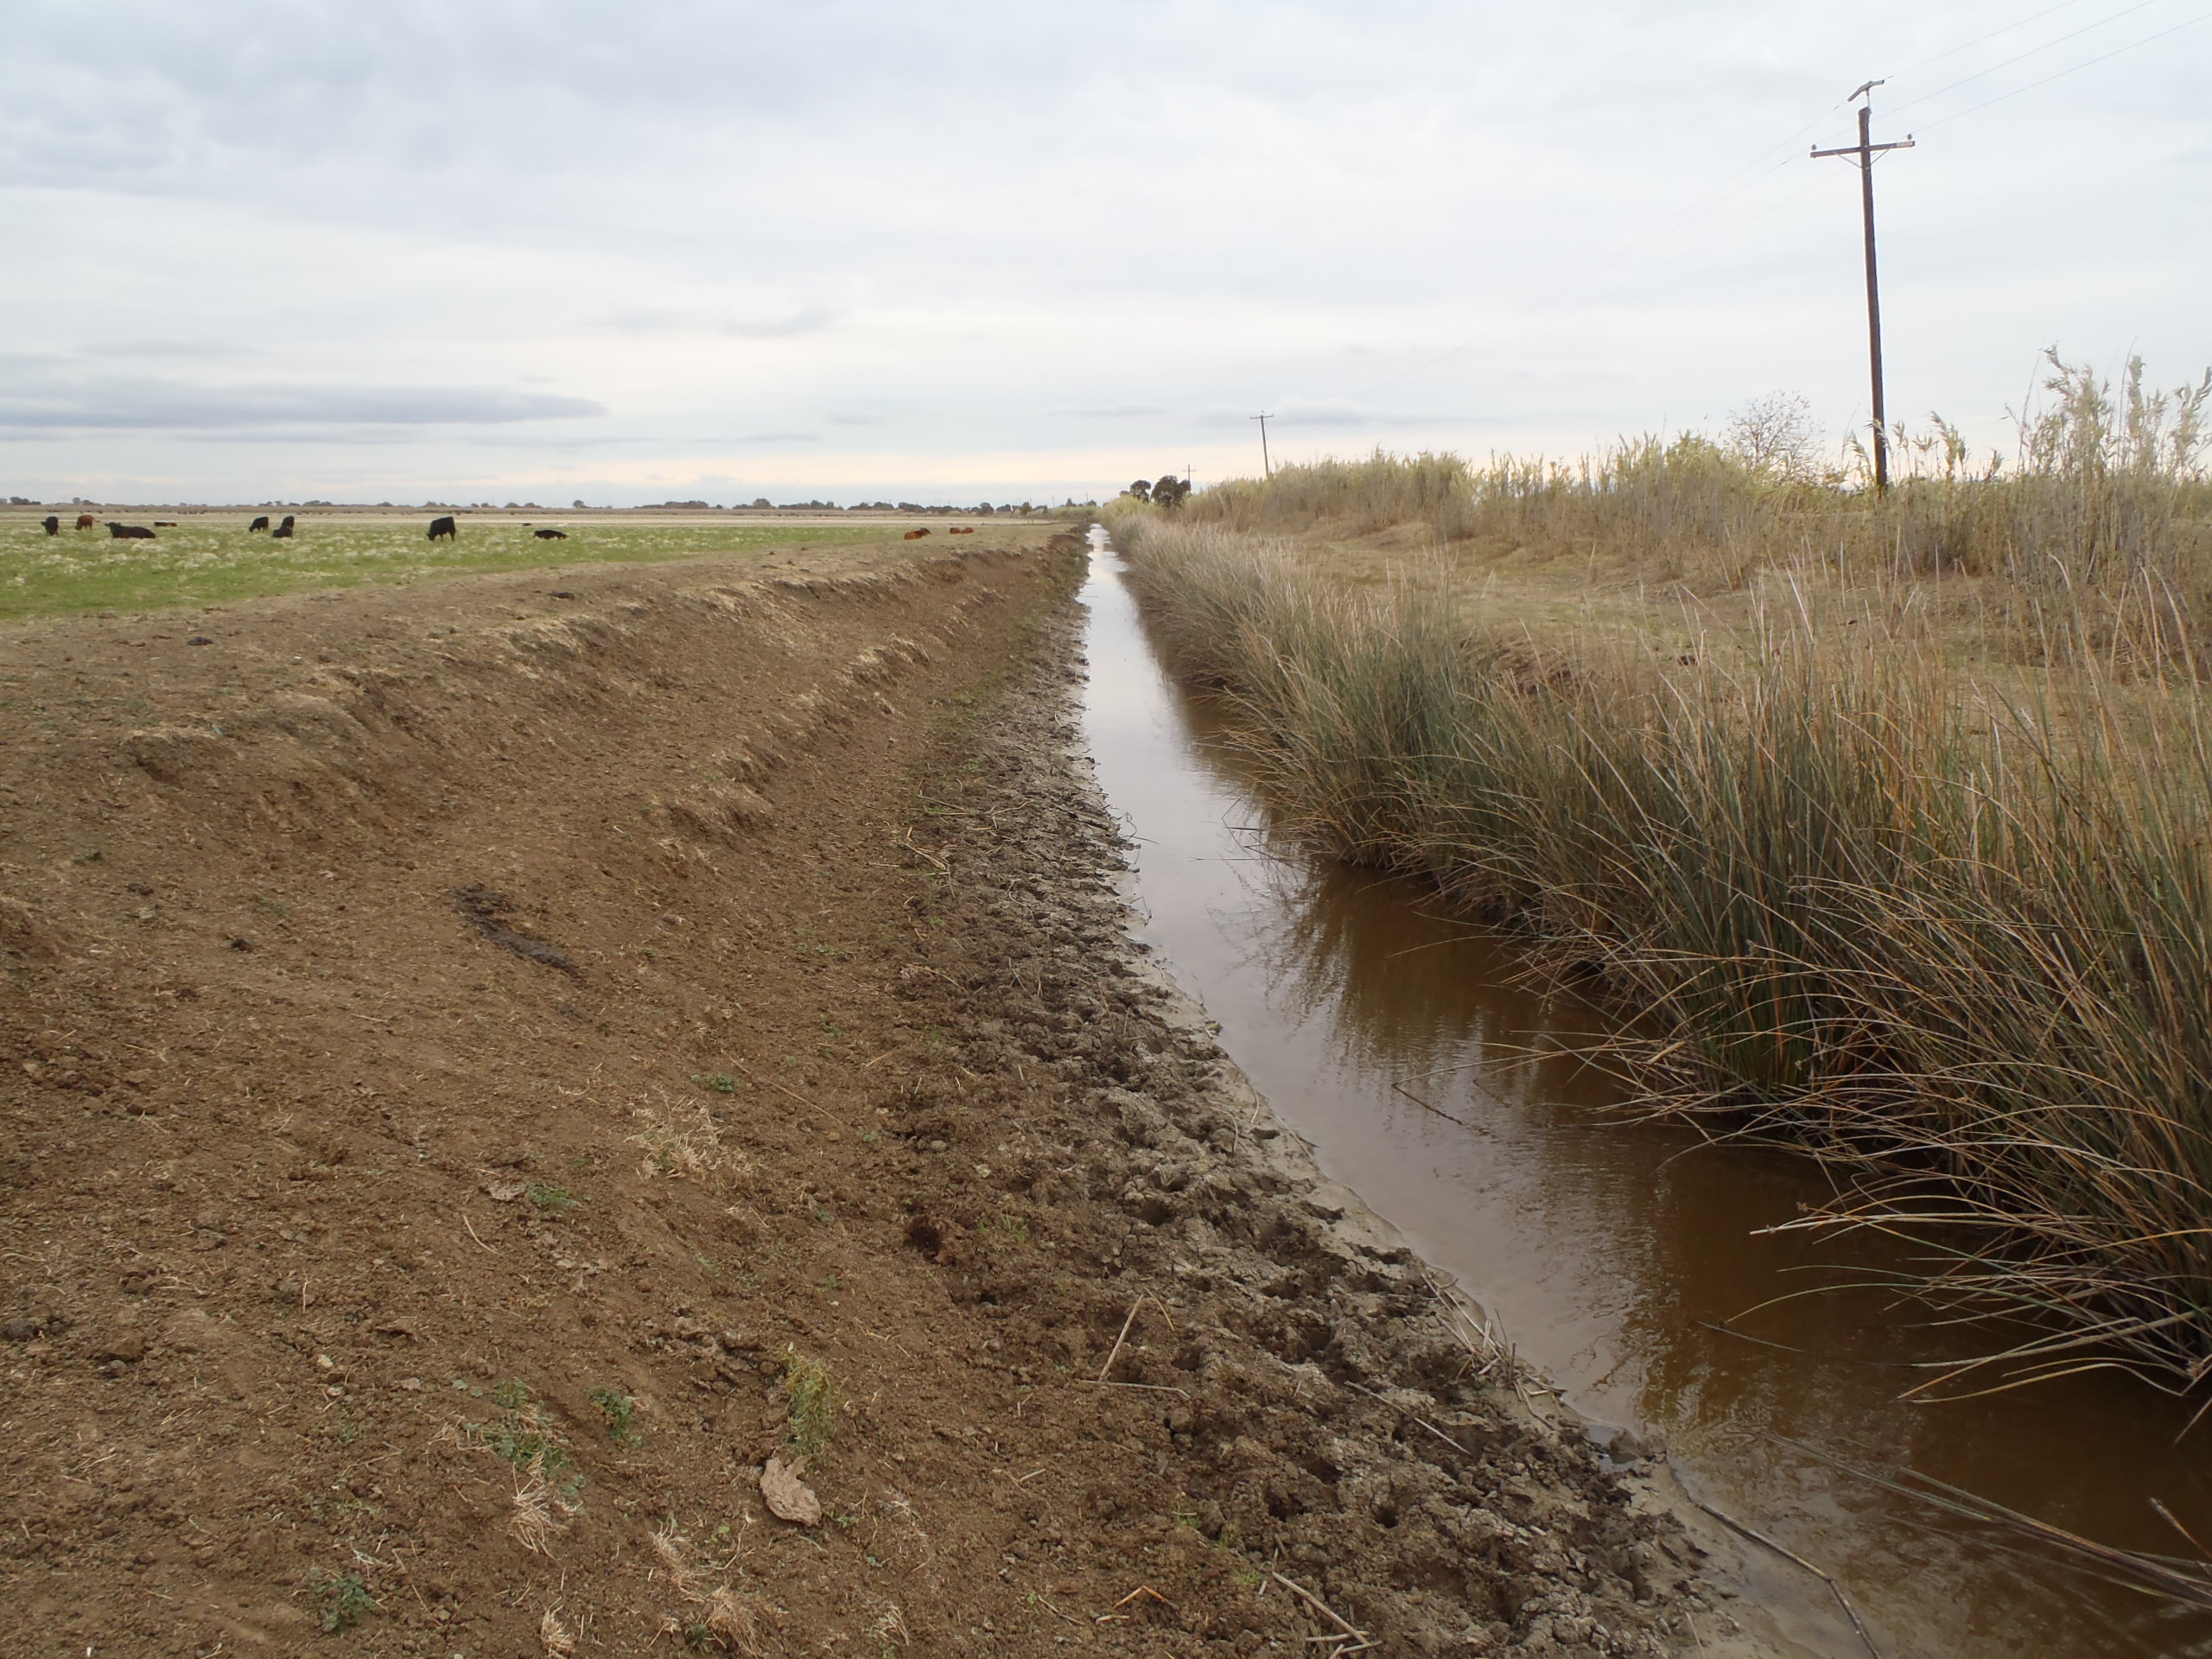 Tail Drain Ditch prior to revegetation, fall 2012.